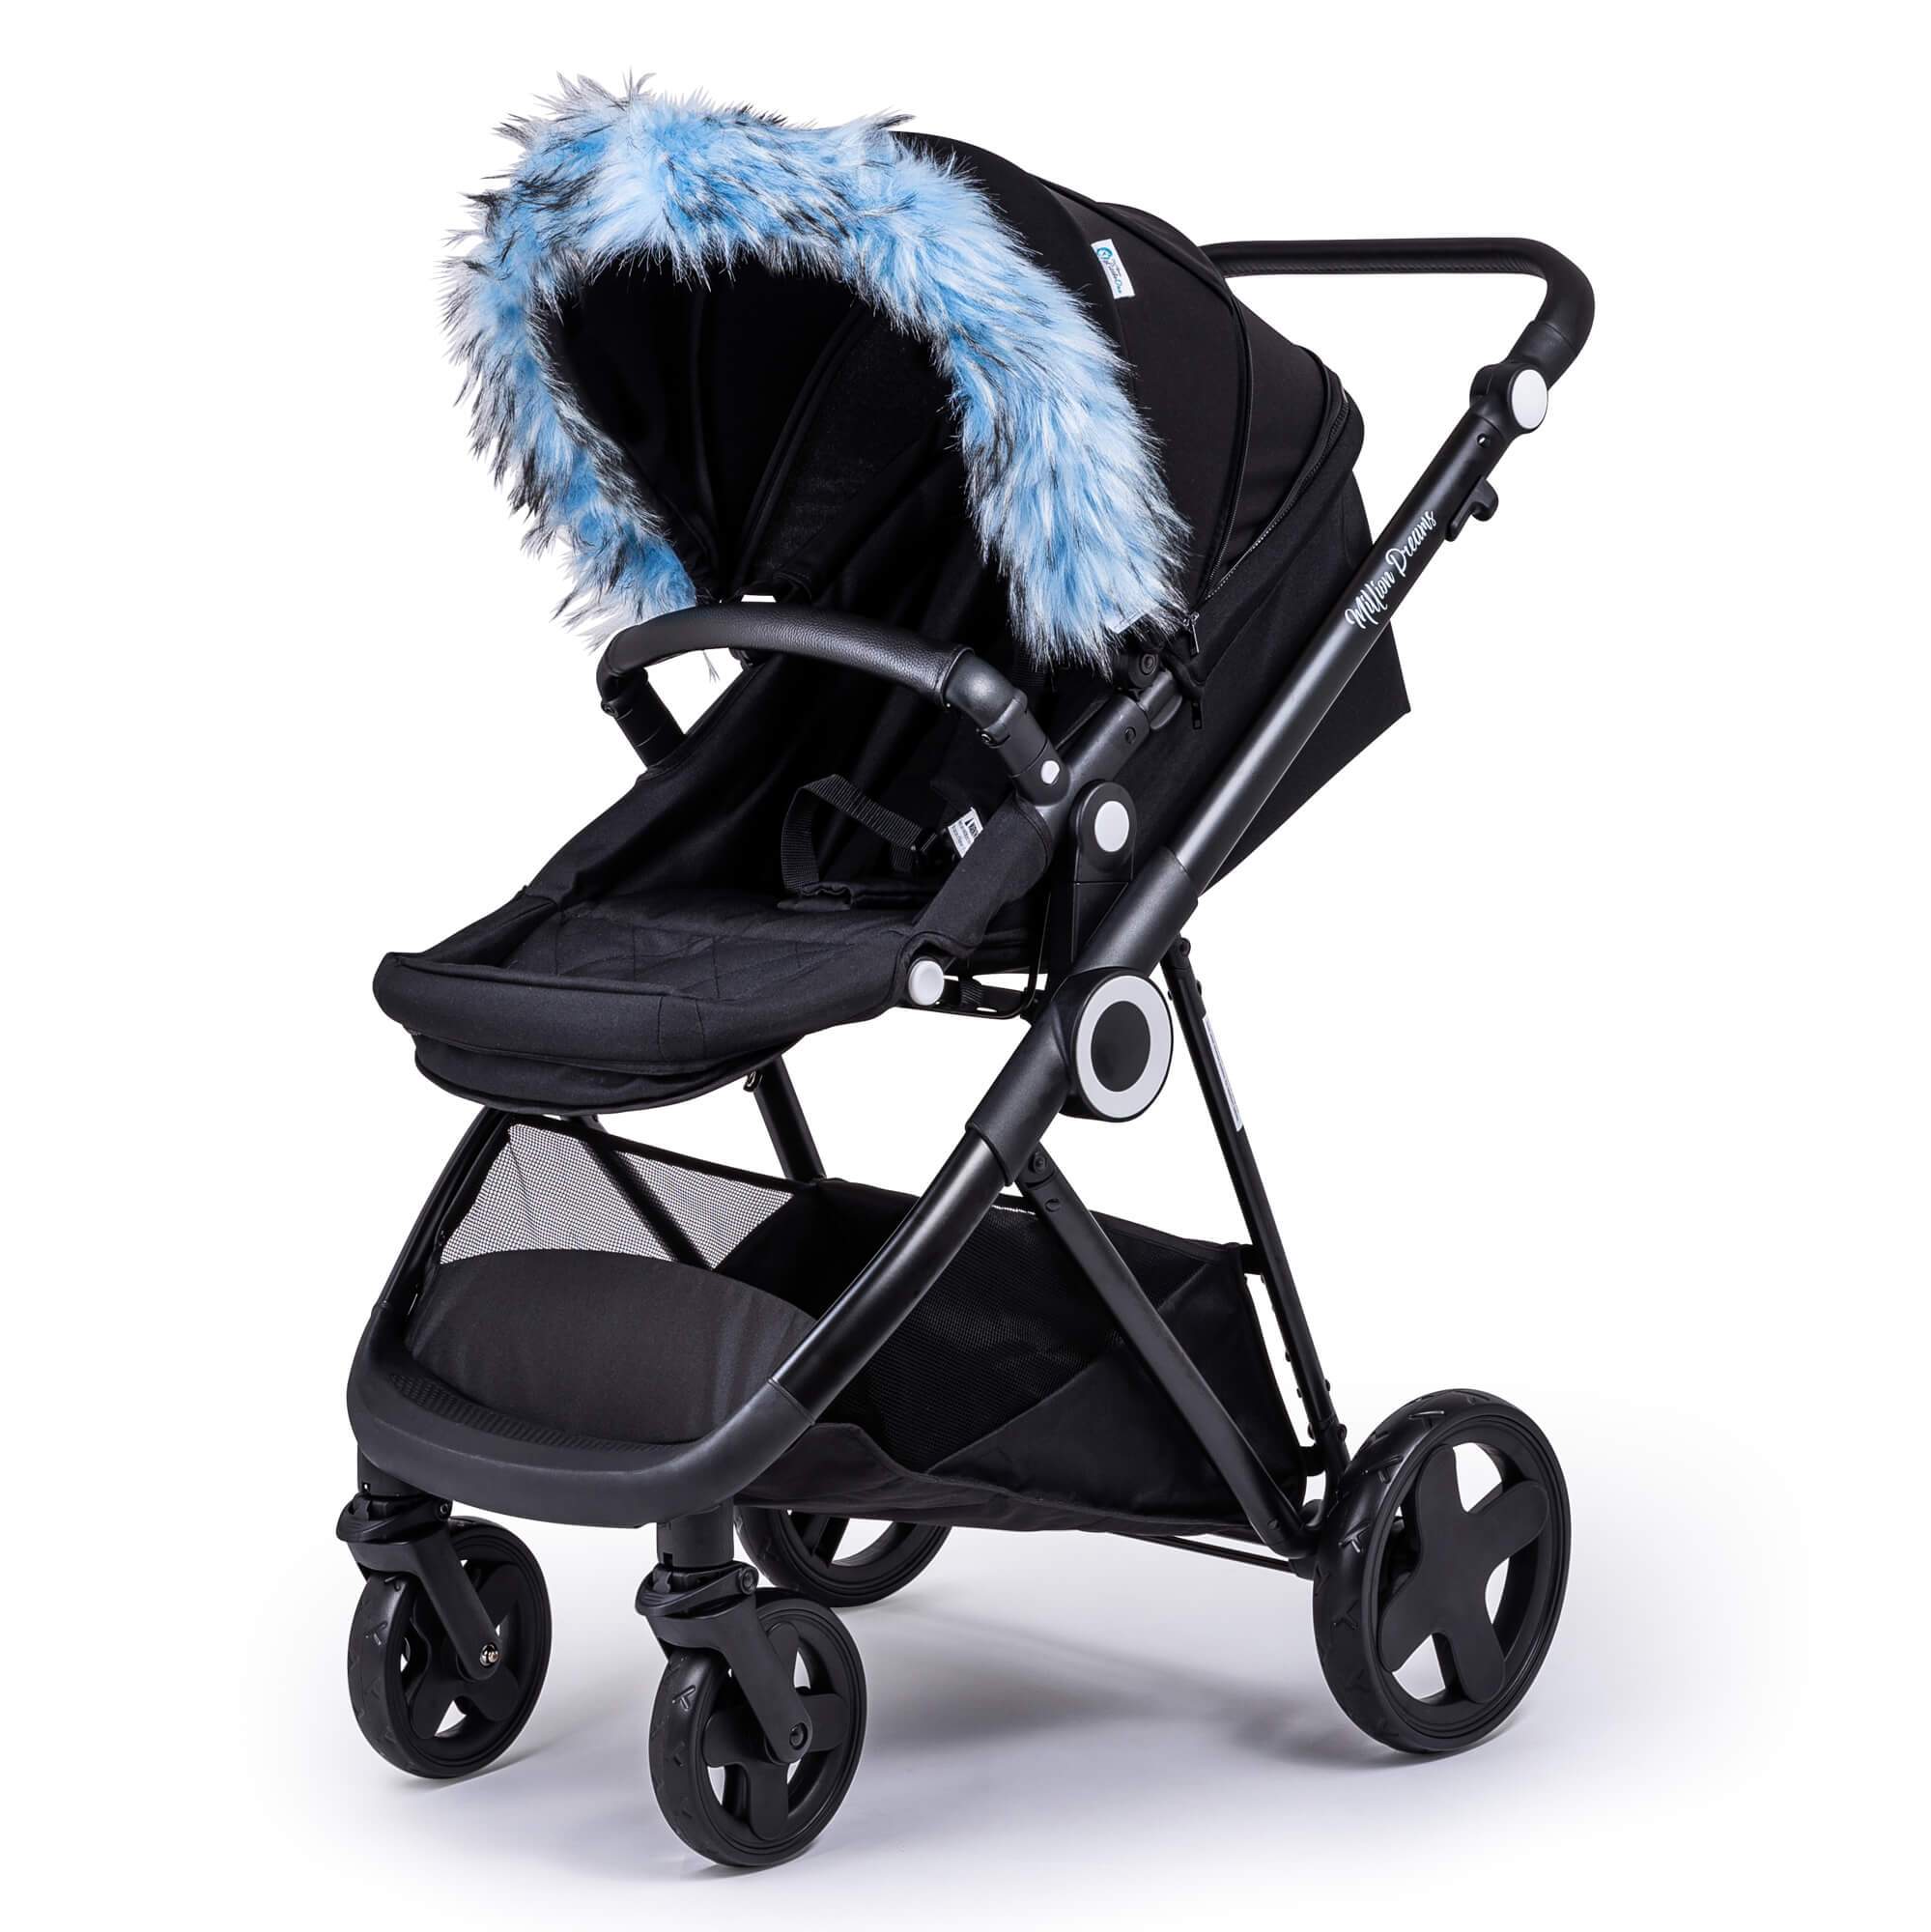 Pram Fur Hood Trim Attachment For Pushchair Compatible with Roma - Light Blue / Fits All Models | For Your Little One